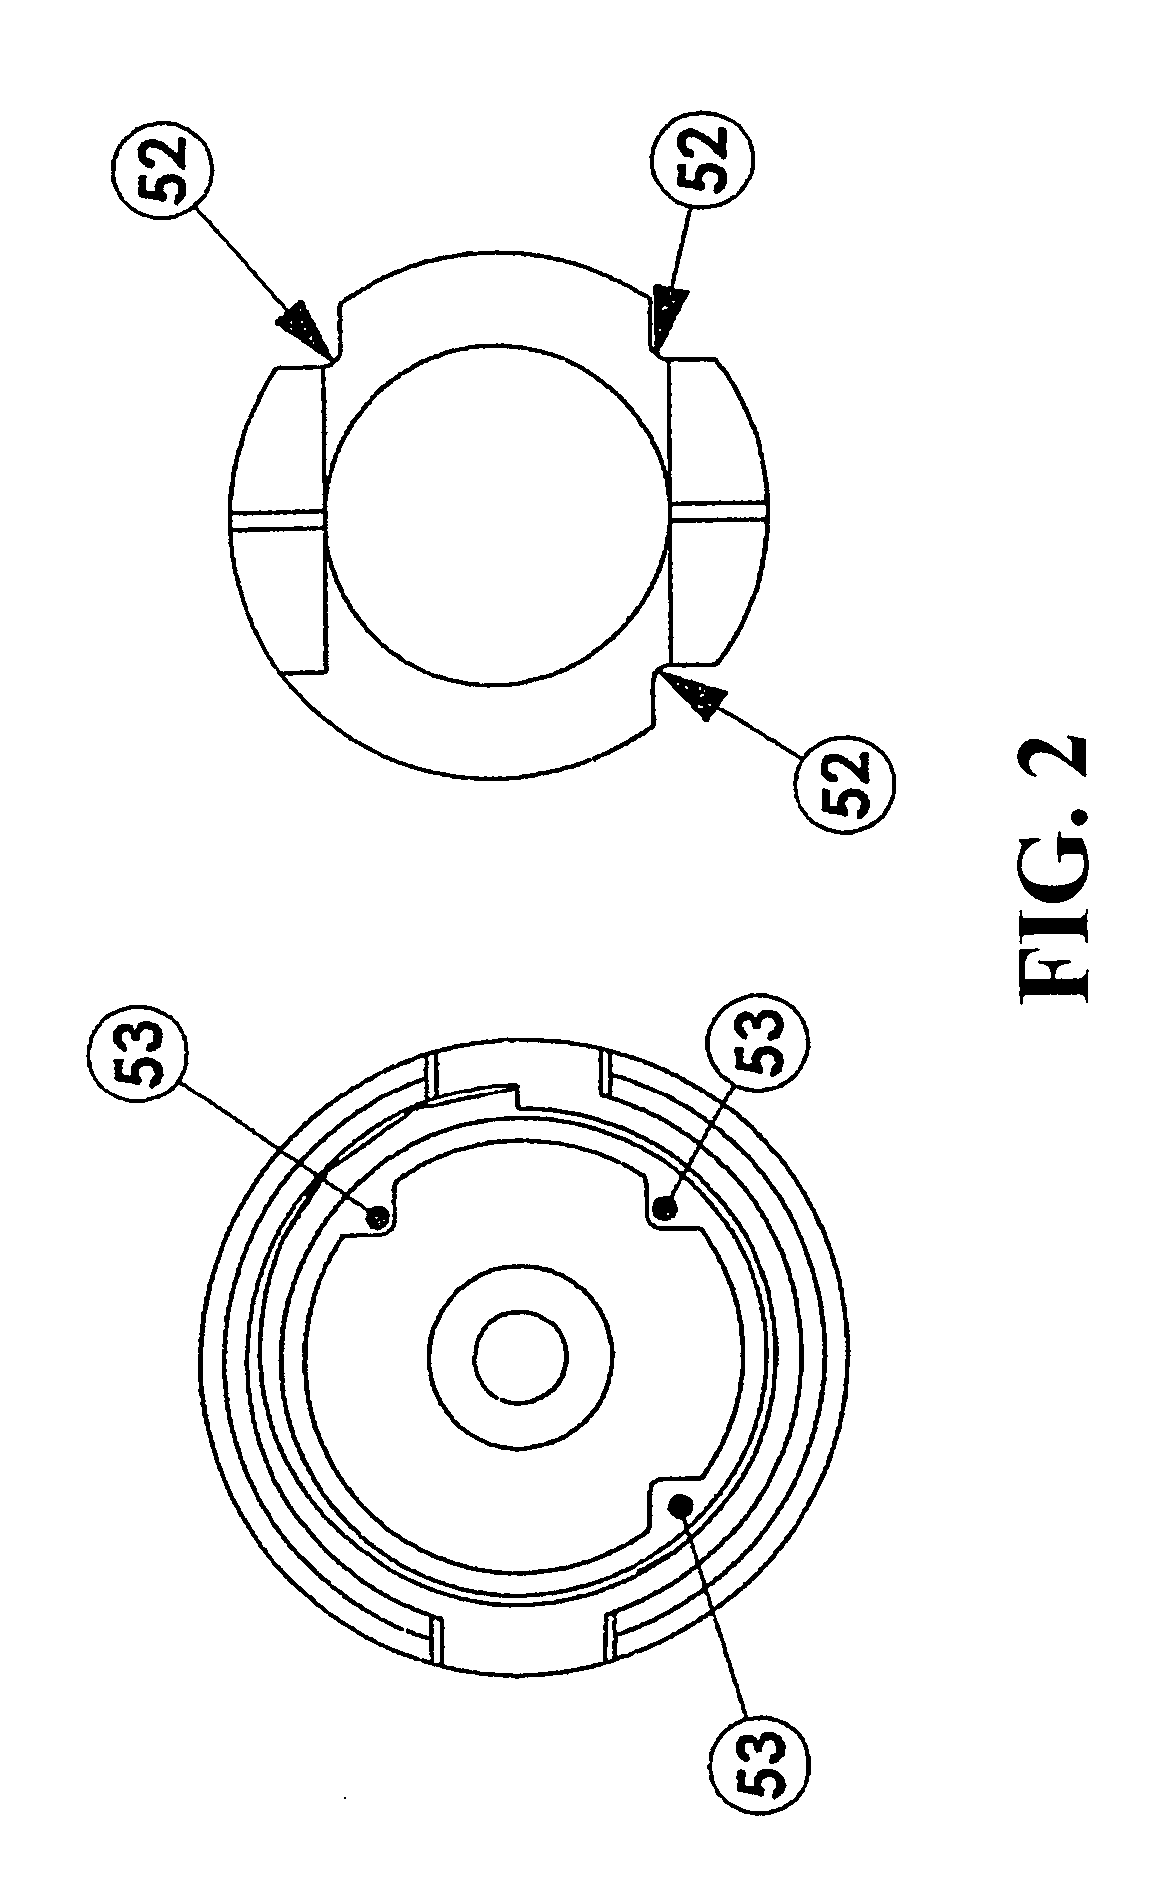 Intramedullary devices and methods of deploying the same